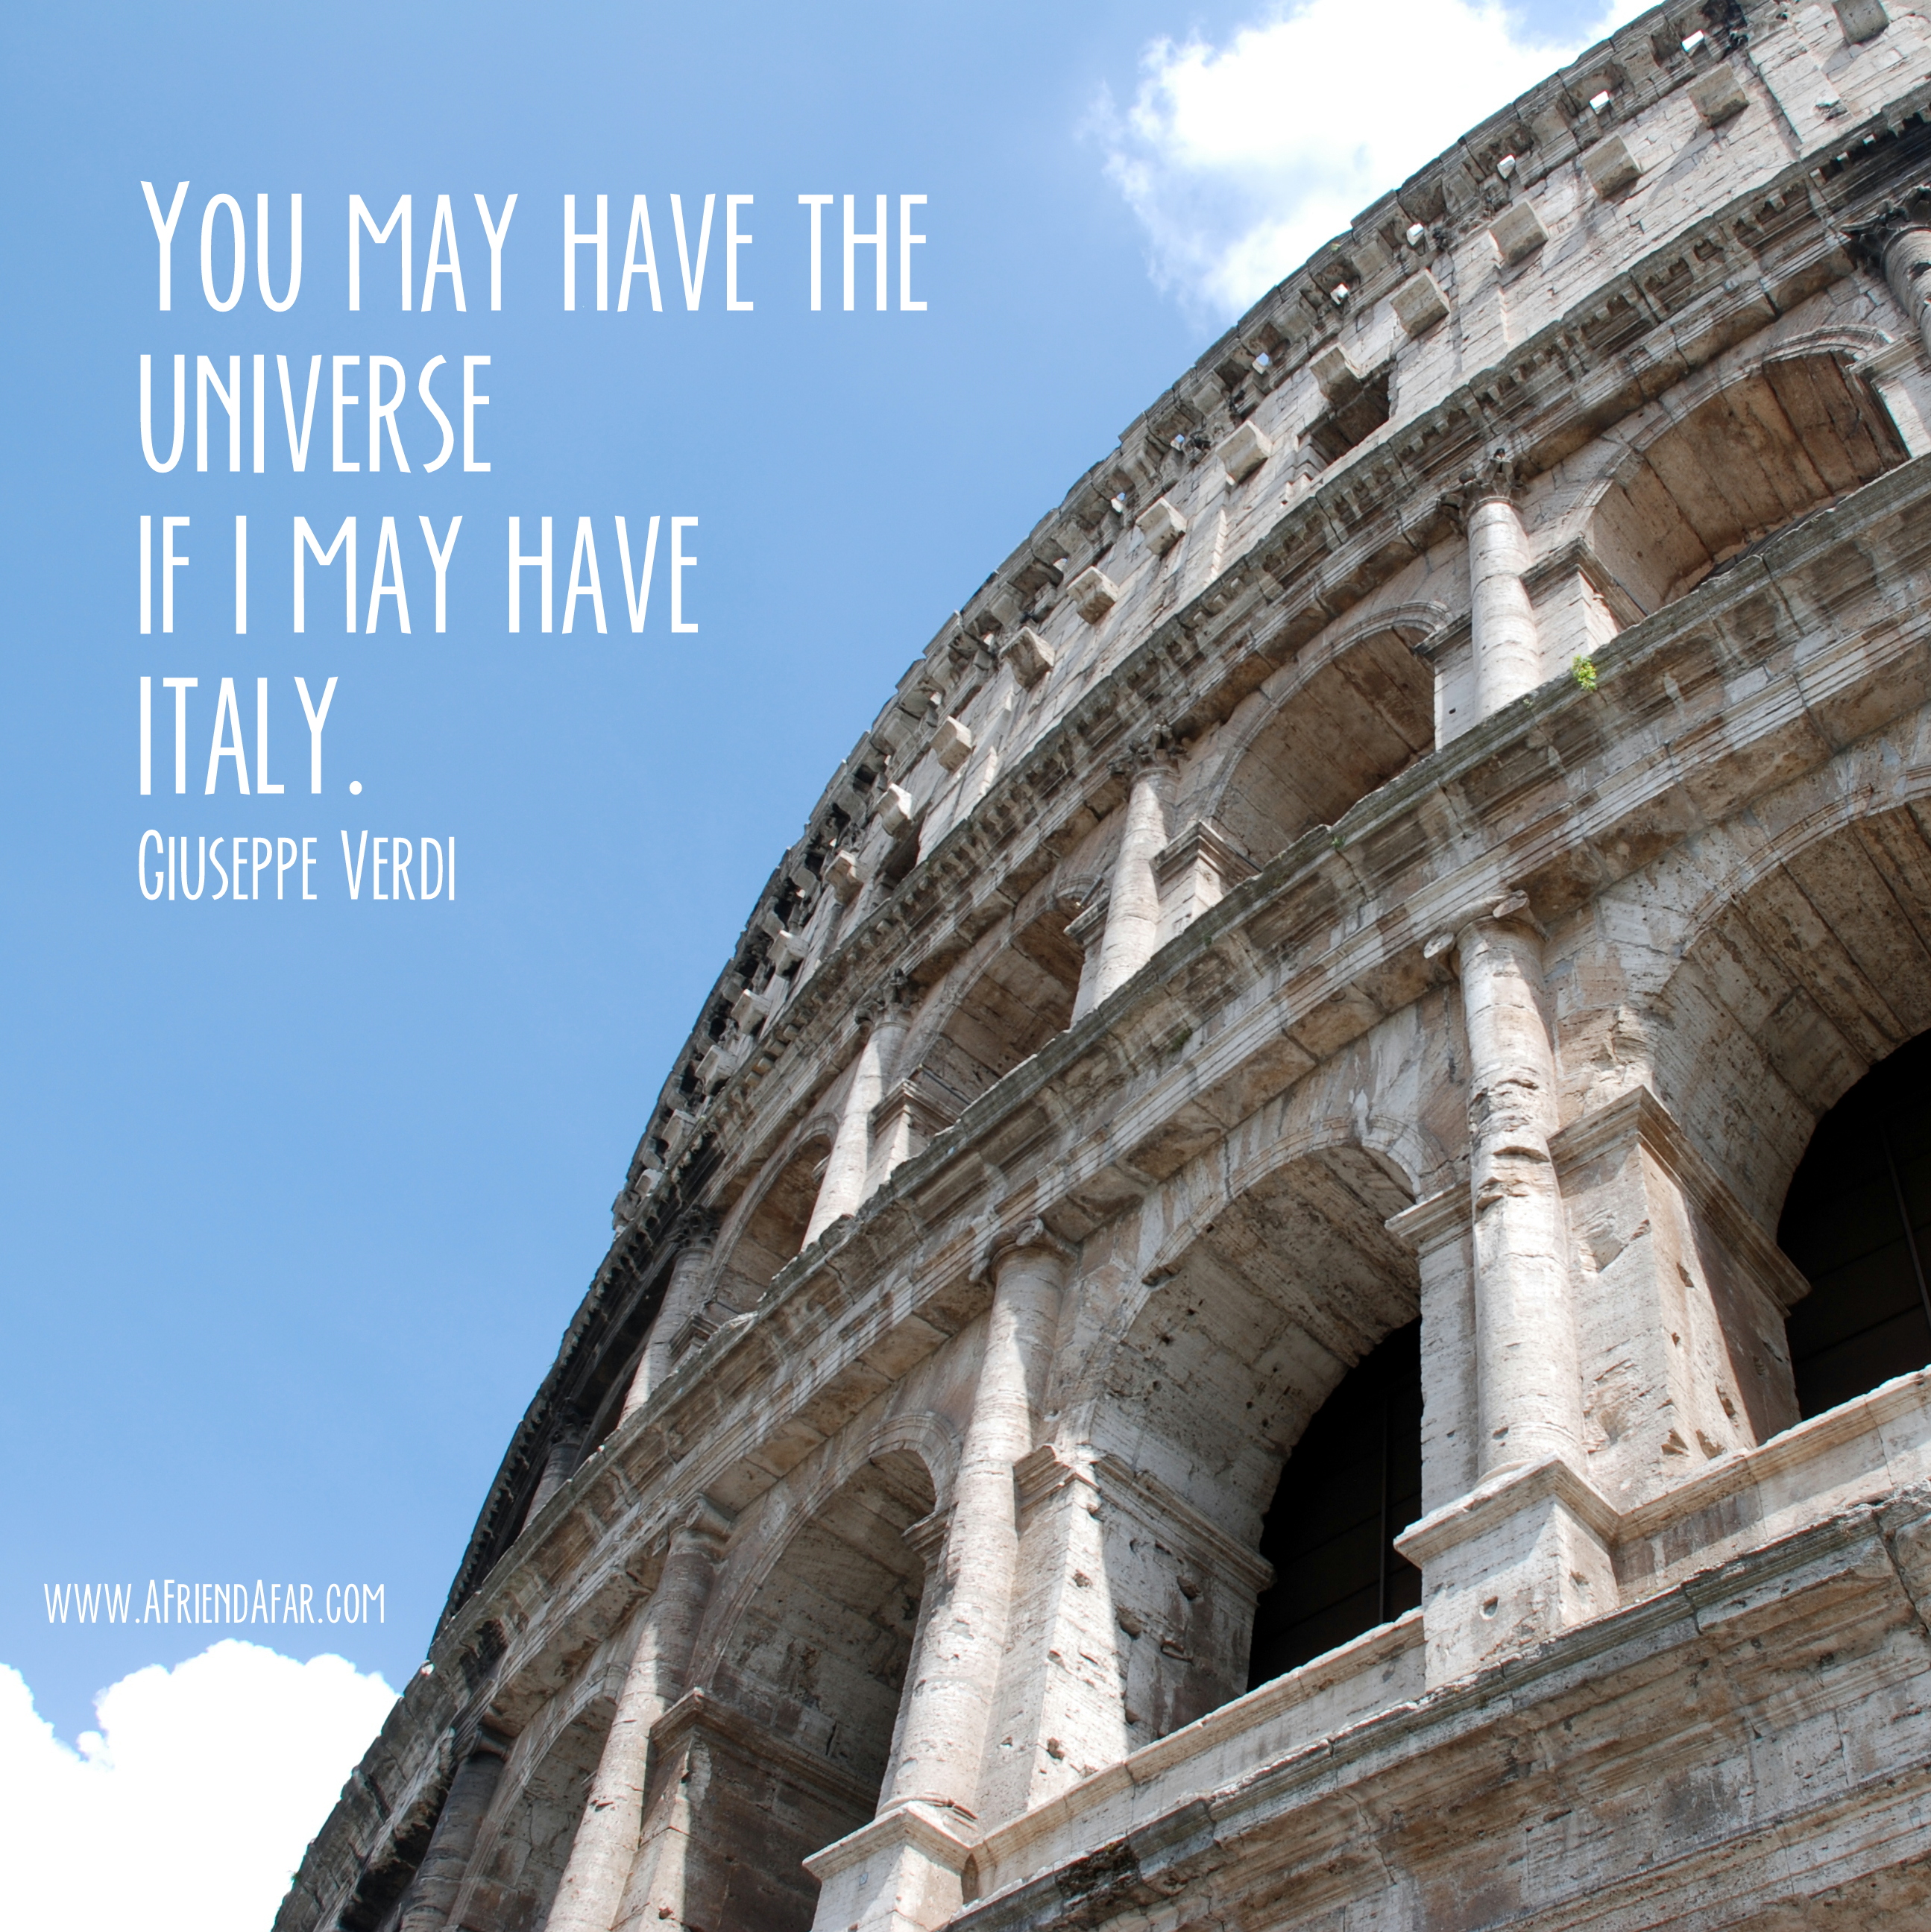 "You May have the universe if I may have Italy." - Giuseppe Verdi - www.AFriendAfar.com